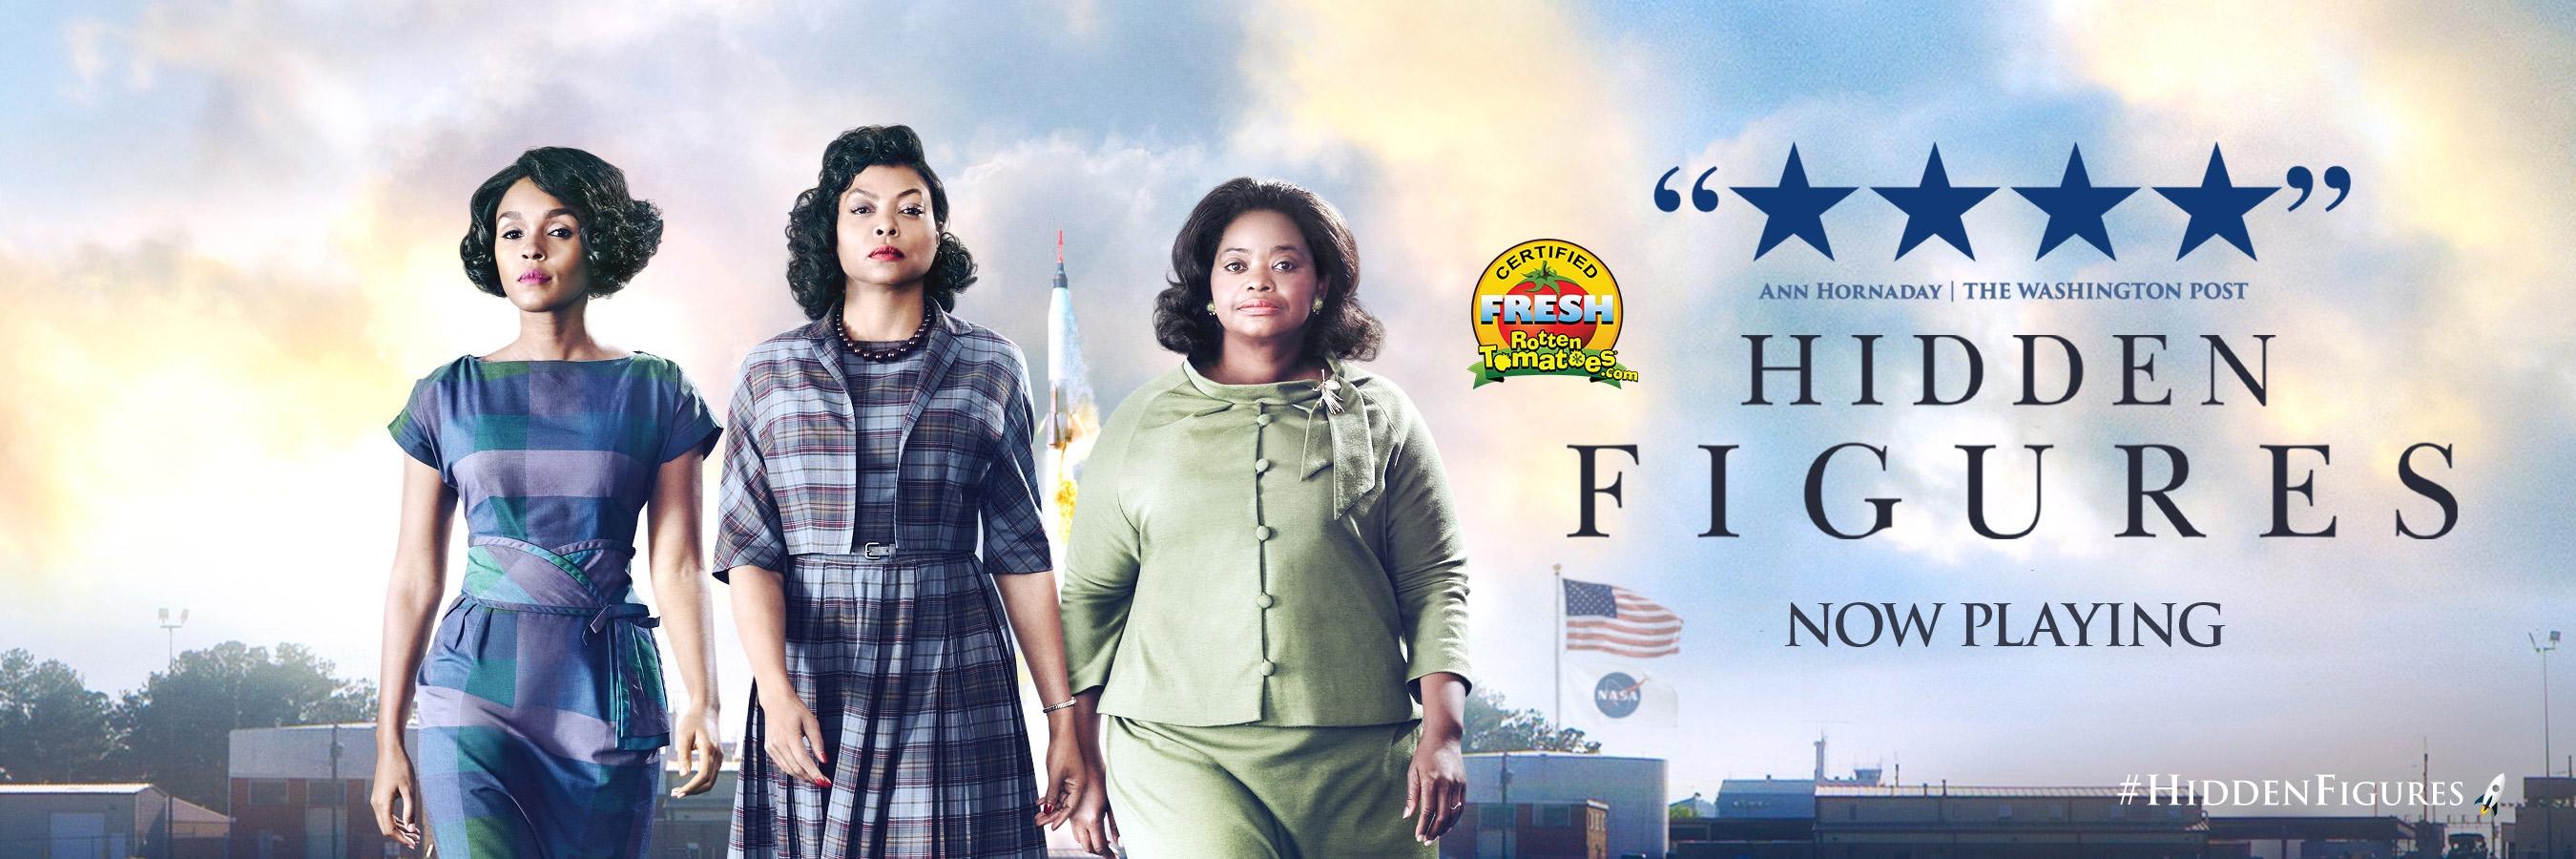 Hidden Figures ChIPs Movie & Panel Discussion RSVP